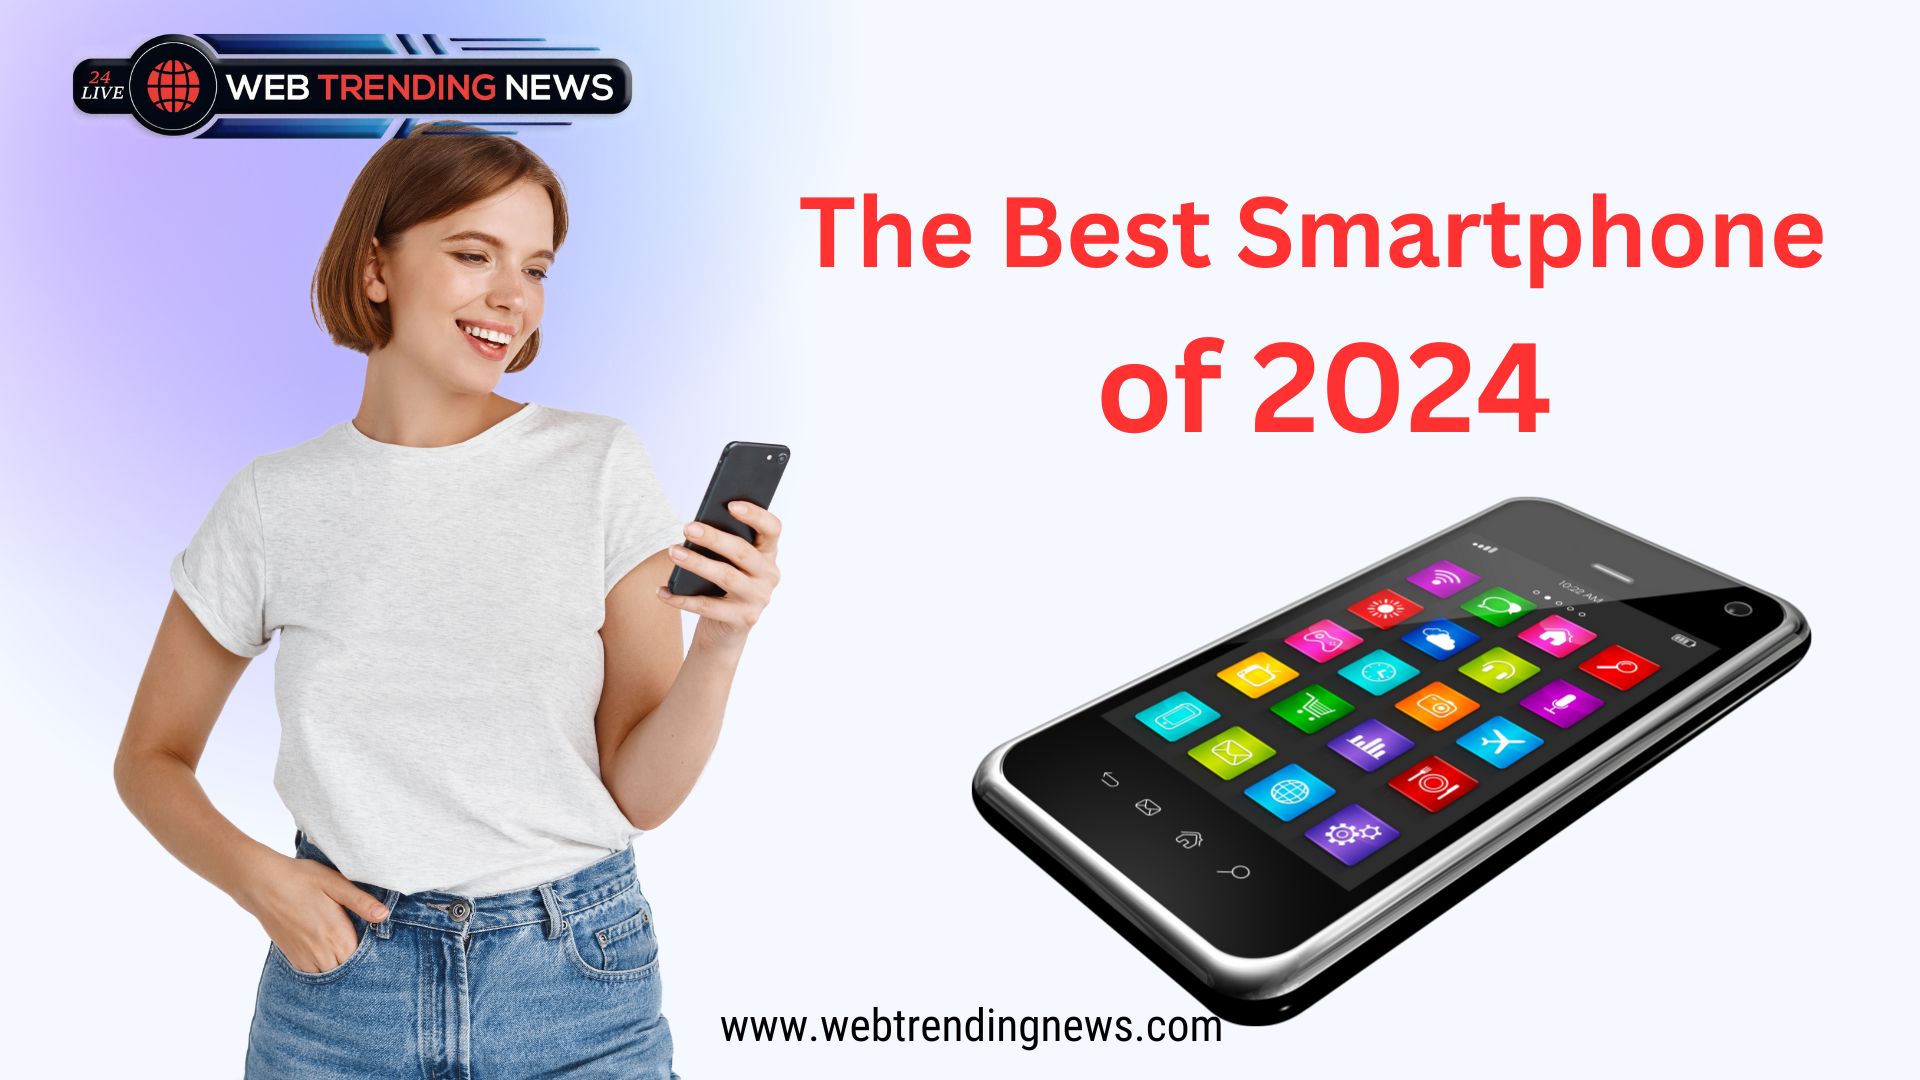 The Best Smartphone of 2024